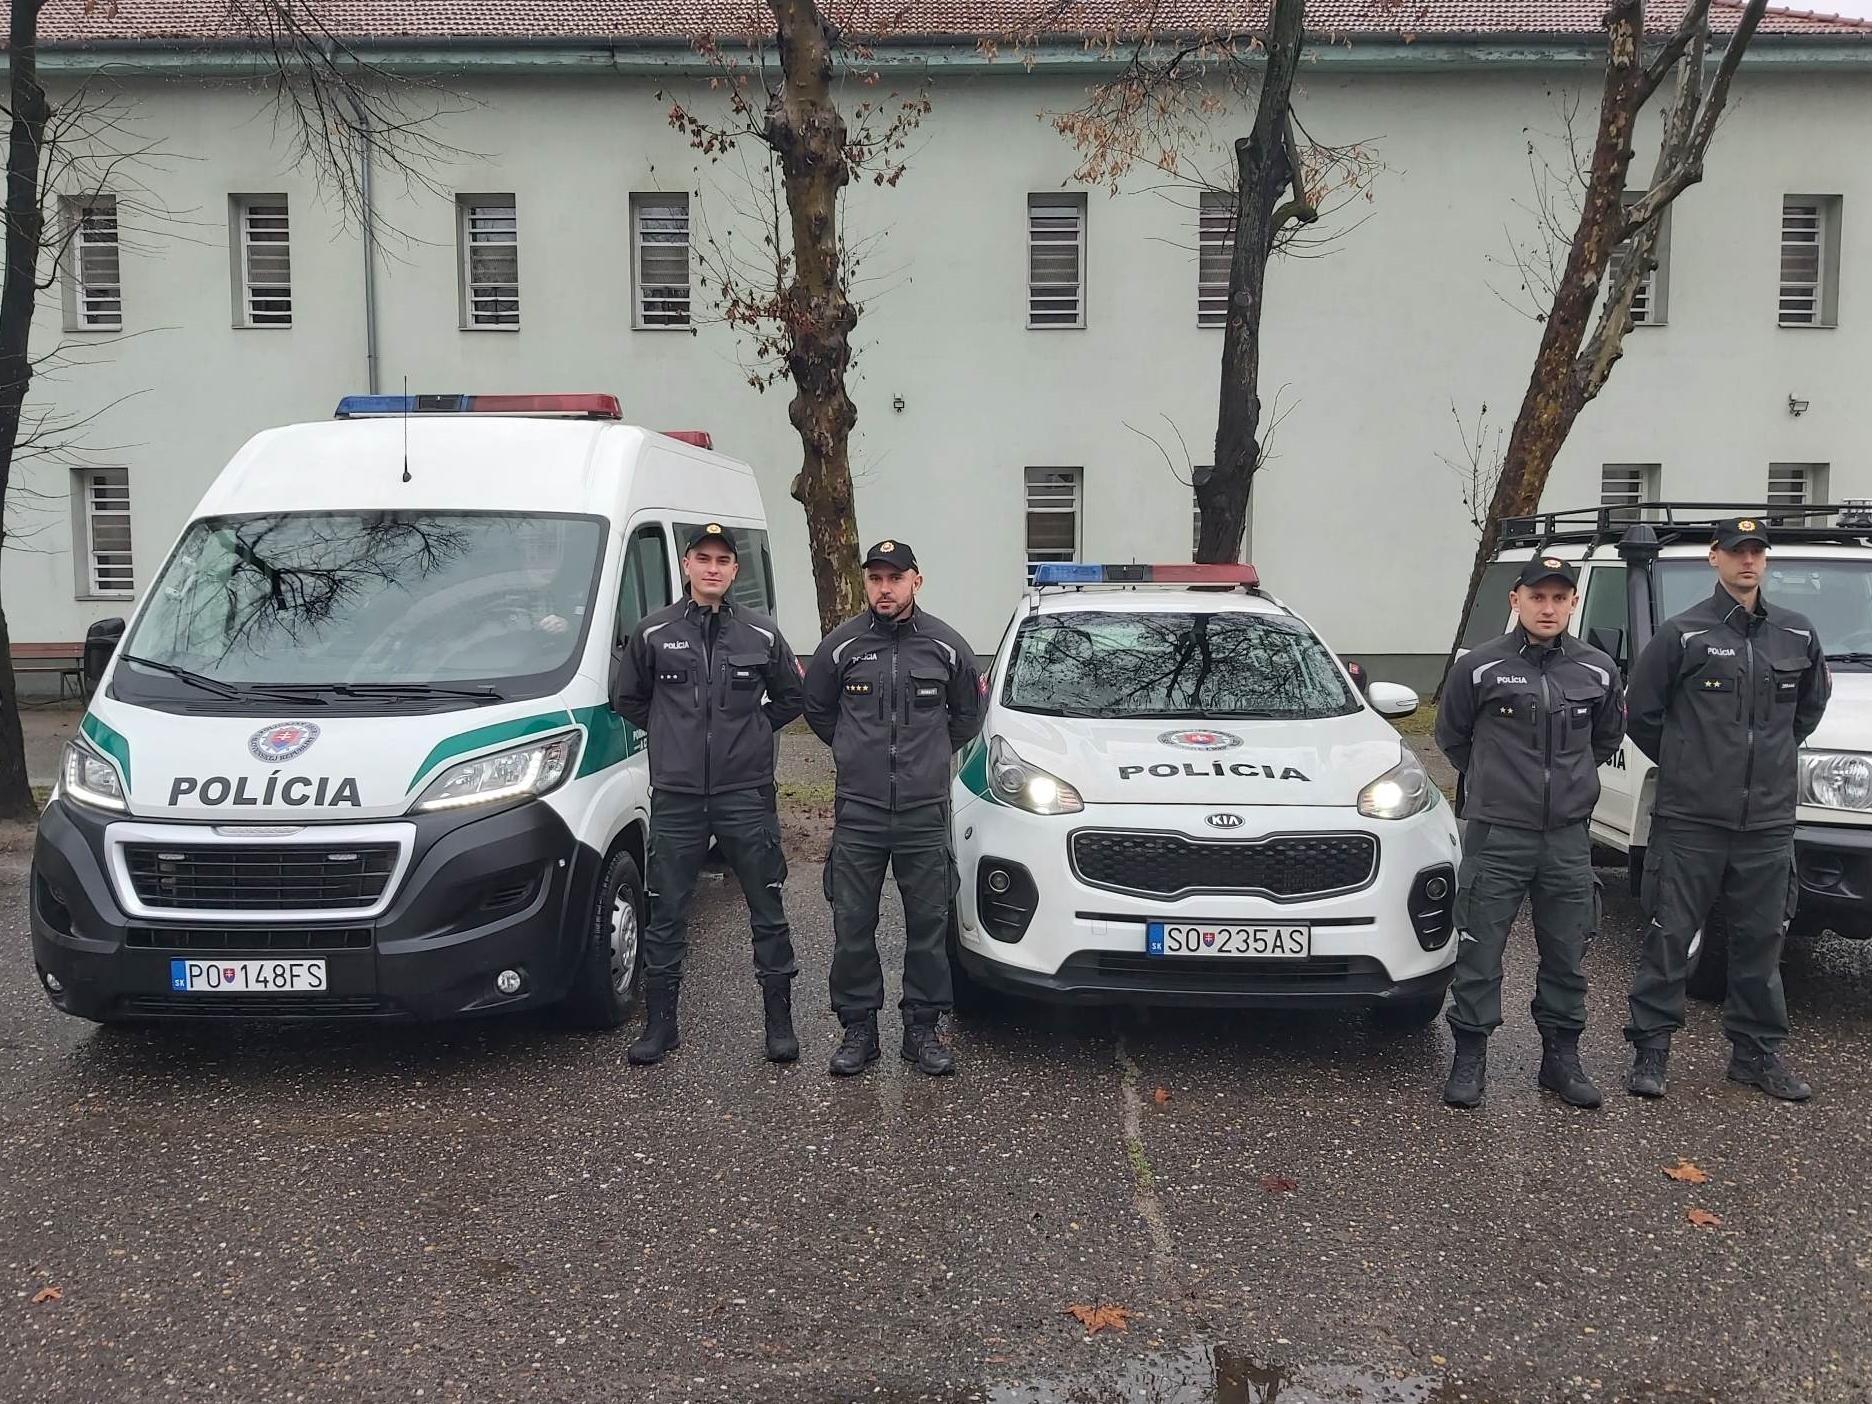 Slovakia Deploys 38 New Police Officers to Hungarian-Serbian Border